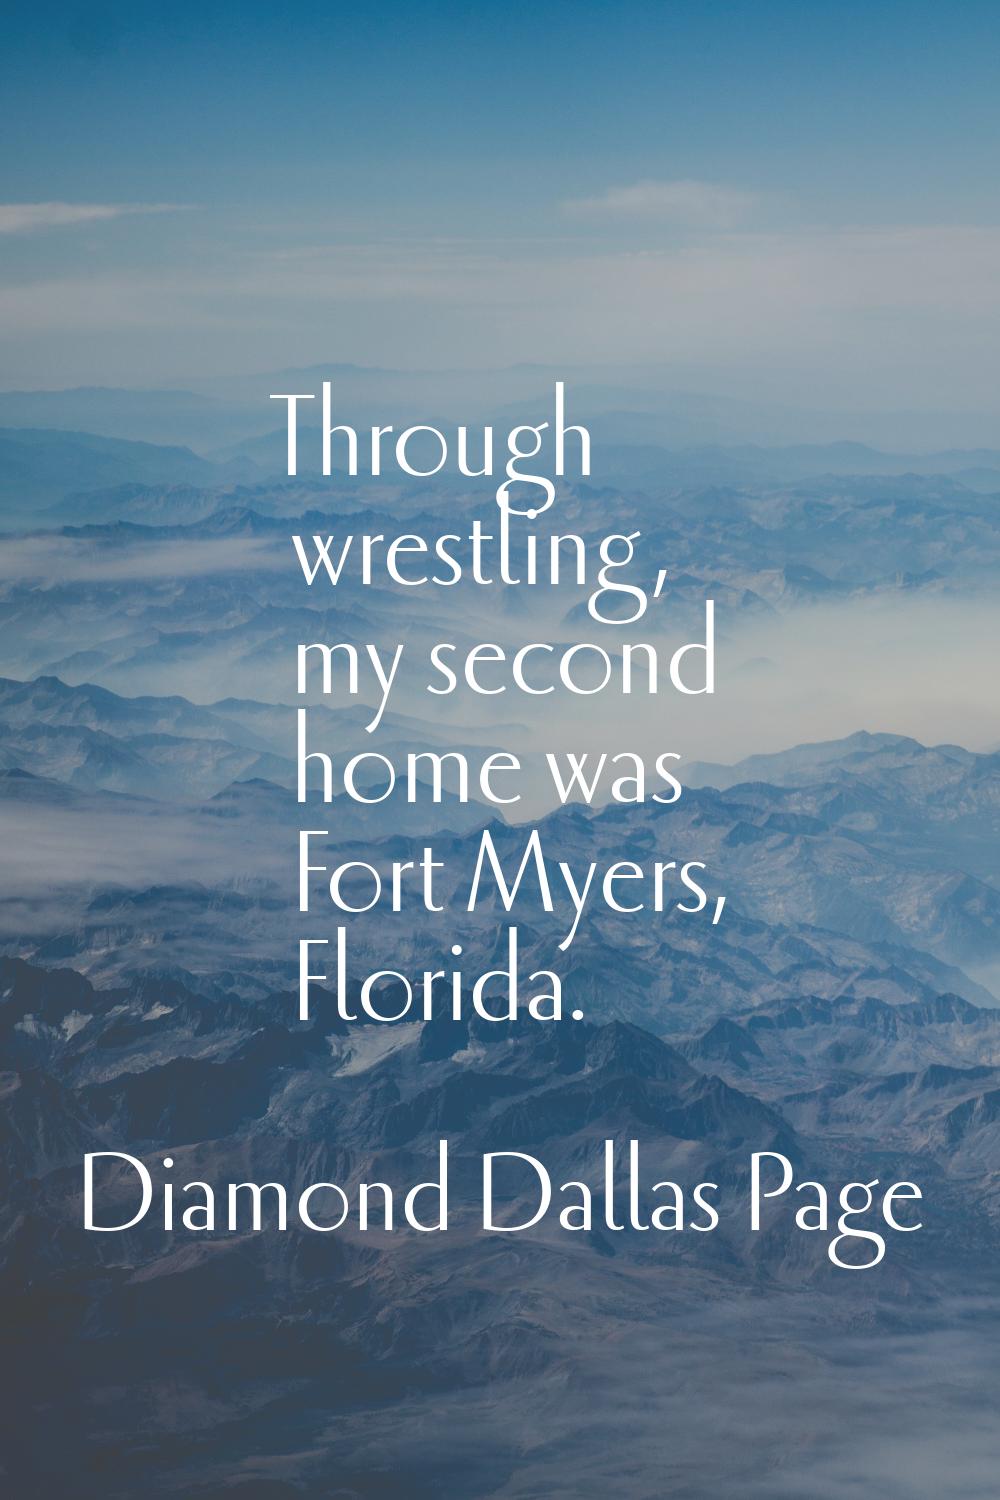 Through wrestling, my second home was Fort Myers, Florida.